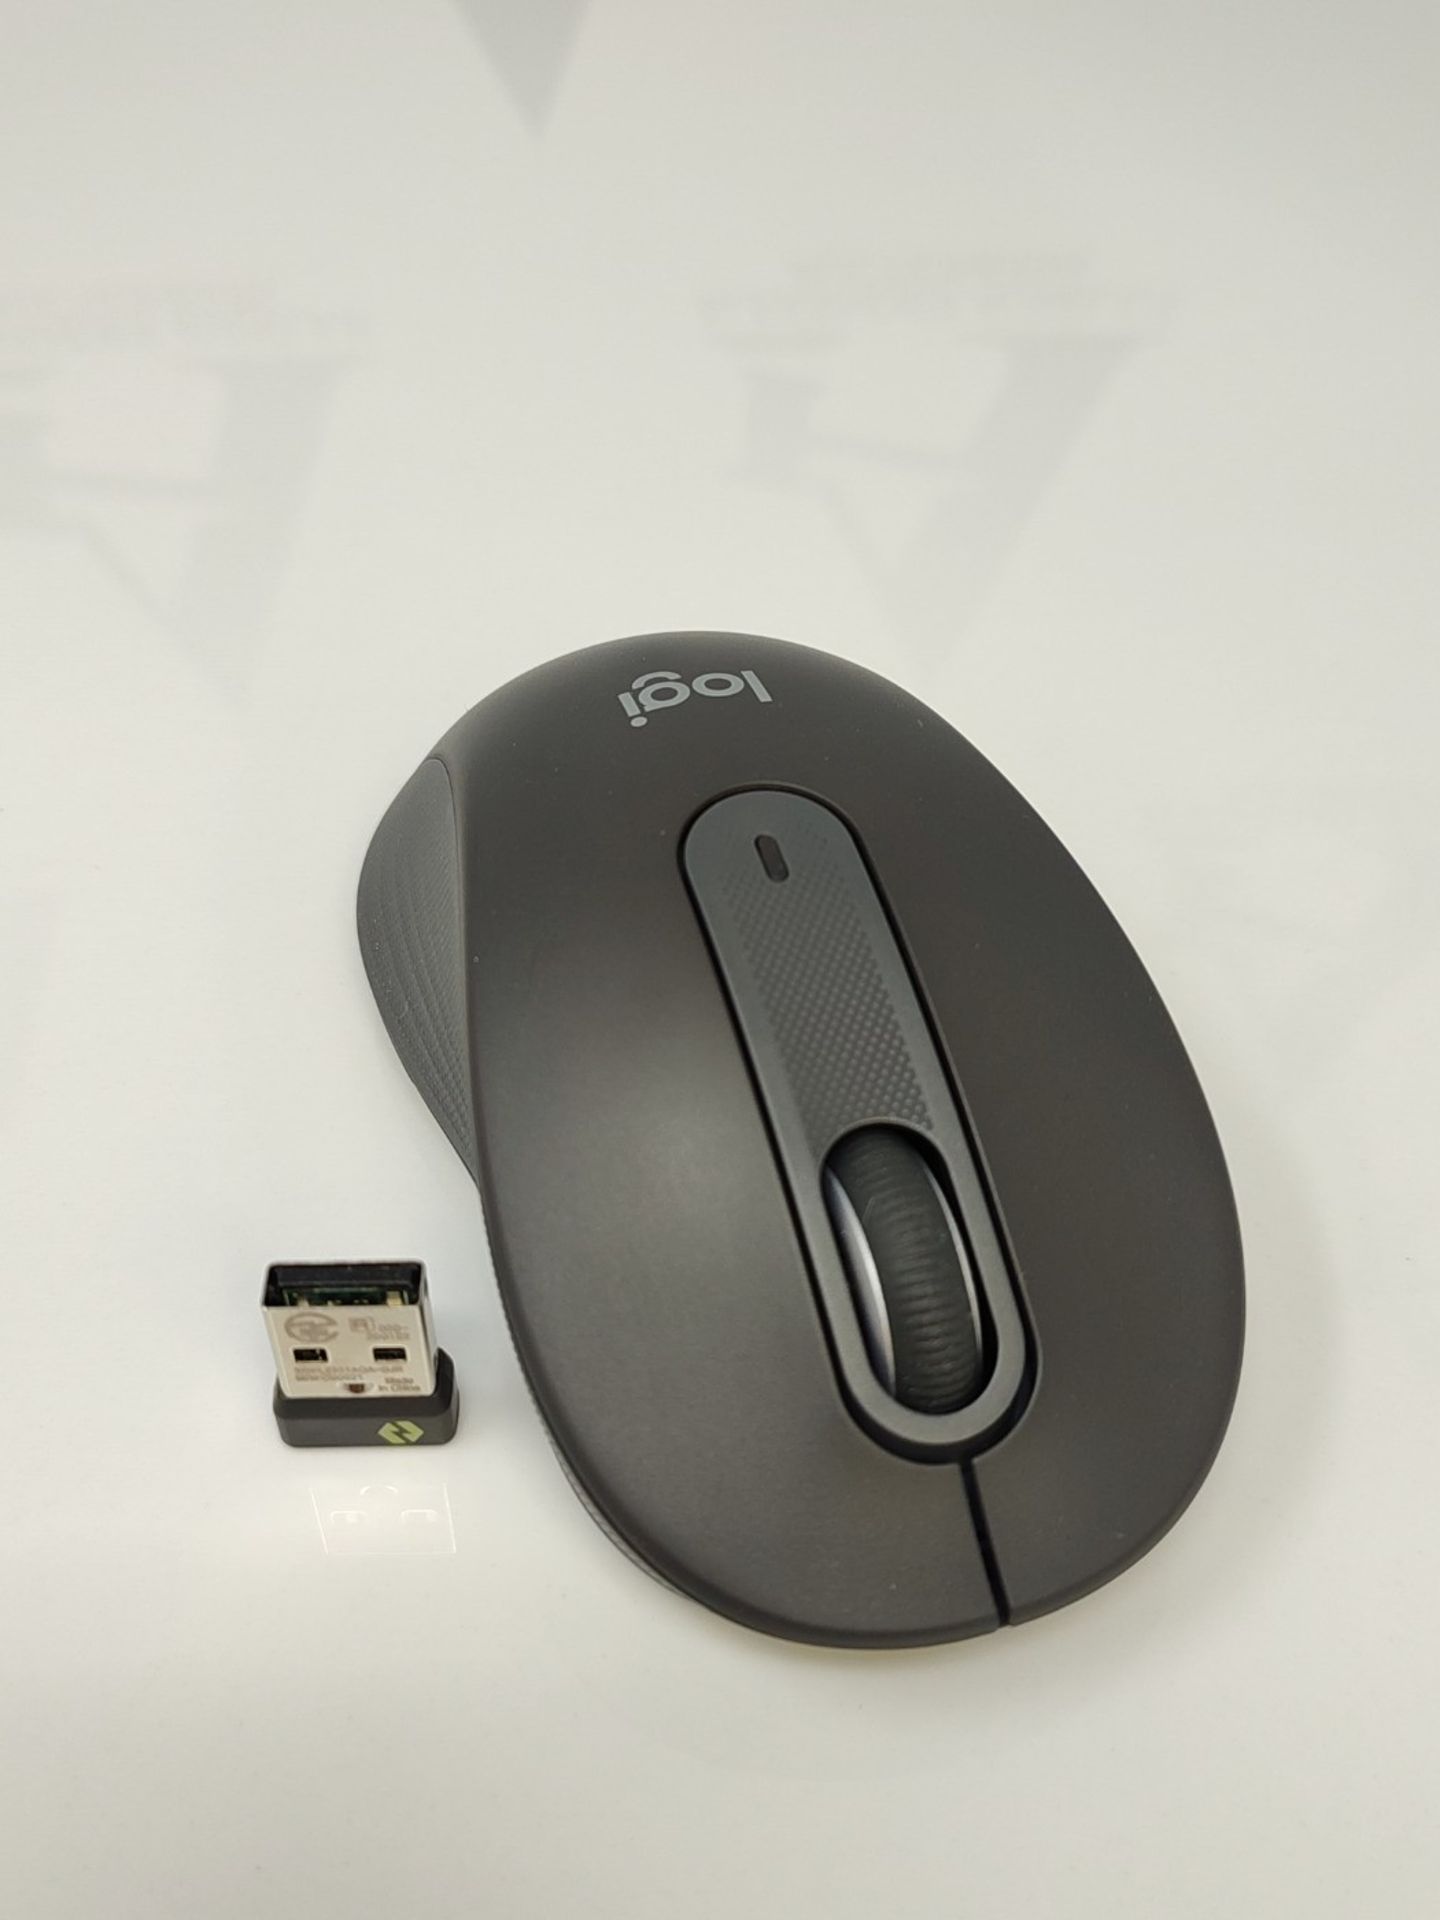 Logitech Signature M650 Wireless Mouse - for small to medium-sized hands, 2-year batte - Image 3 of 3